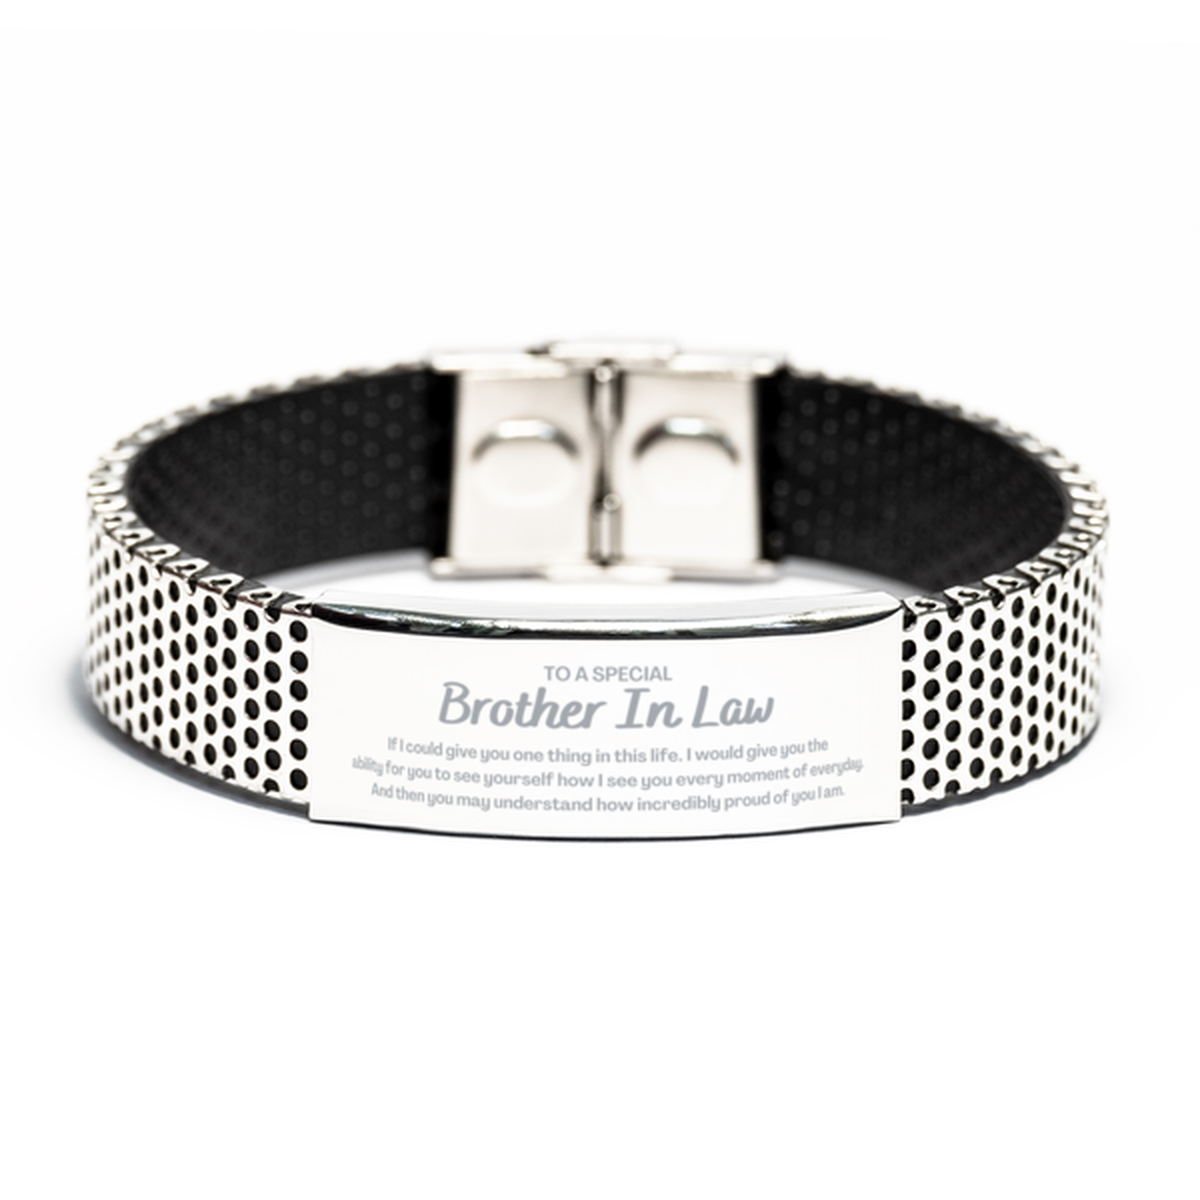 To My Brother In Law Stainless Steel Bracelet, Gifts For Brother In Law Engraved, Inspirational Gifts for Christmas Birthday, Epic Gifts for Brother In Law To A Special Brother In Law how incredibly proud of you I am